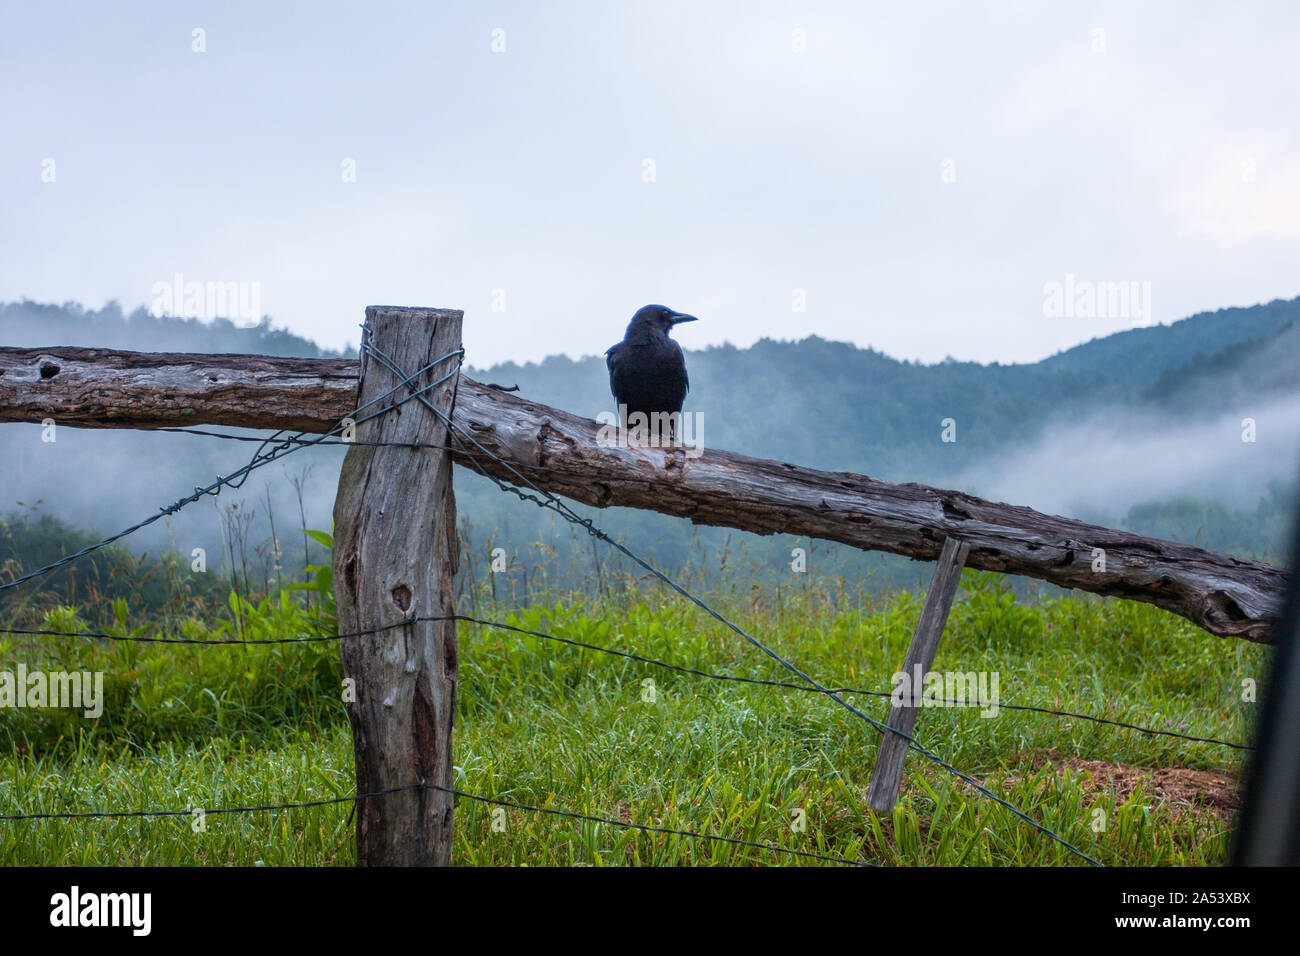 A crow rests on a wooden fence while scanning the fog filled valley below it. Stock Photo